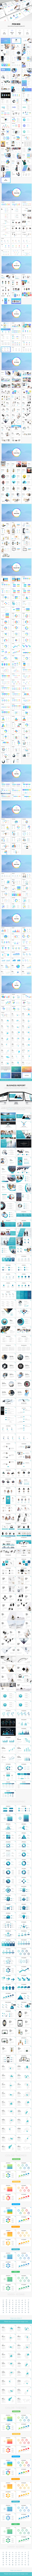 Bundle 2 in 1 Pitch Deck - Multipurpose Powerpoint Template 2018